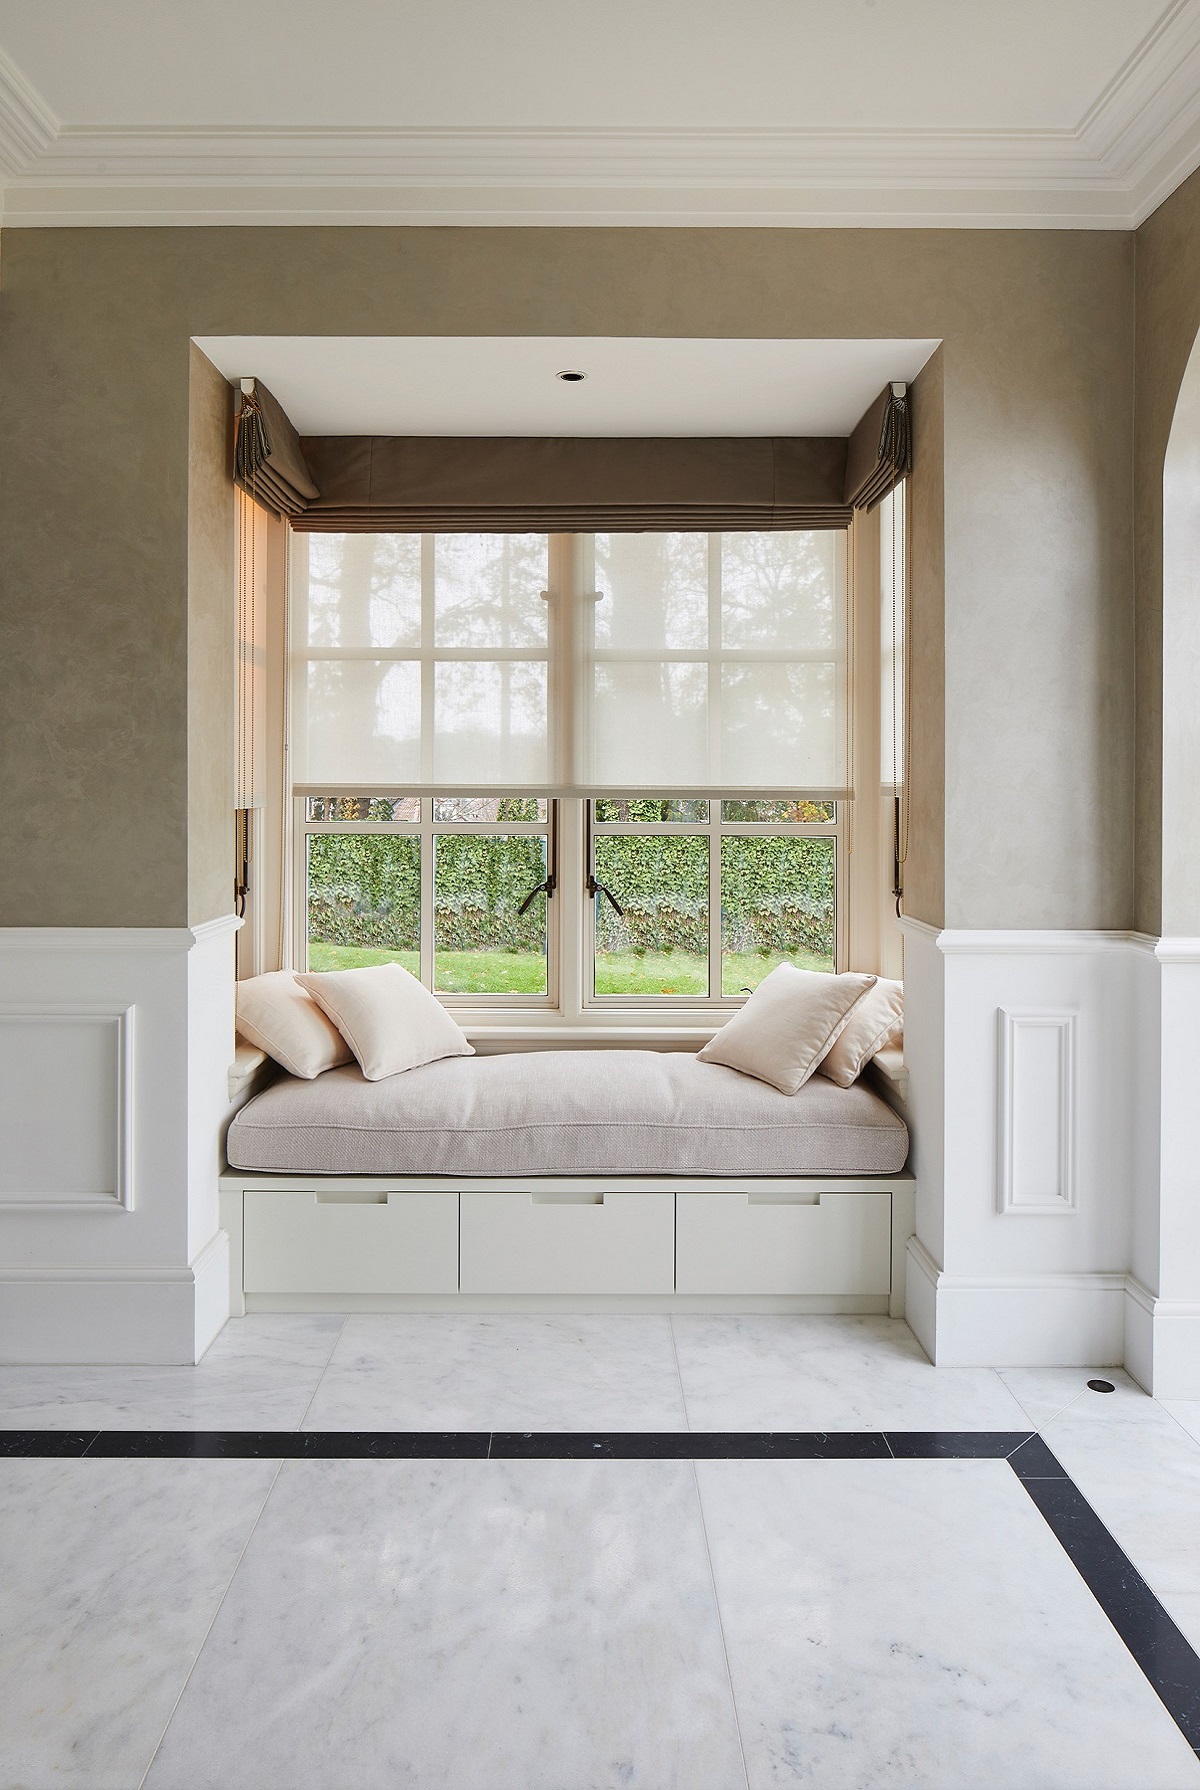 window seat in square window frame with white and grey tiled marble floor